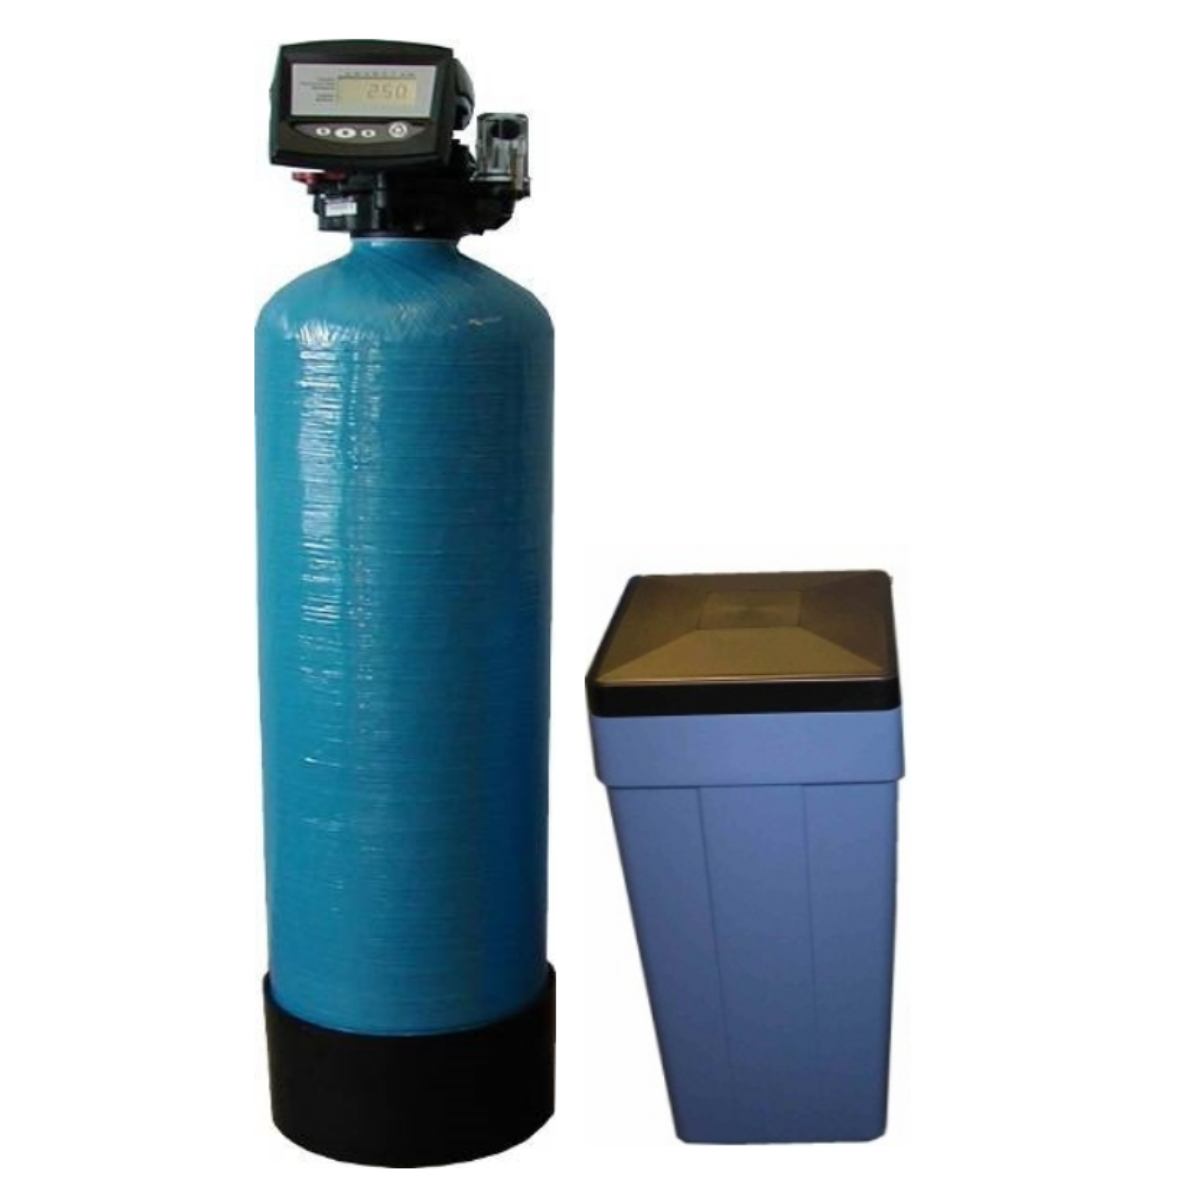 Simplex Autotrol 268 Time Based Controlled Commercial Water Softener 13" x 54", 75 Litres